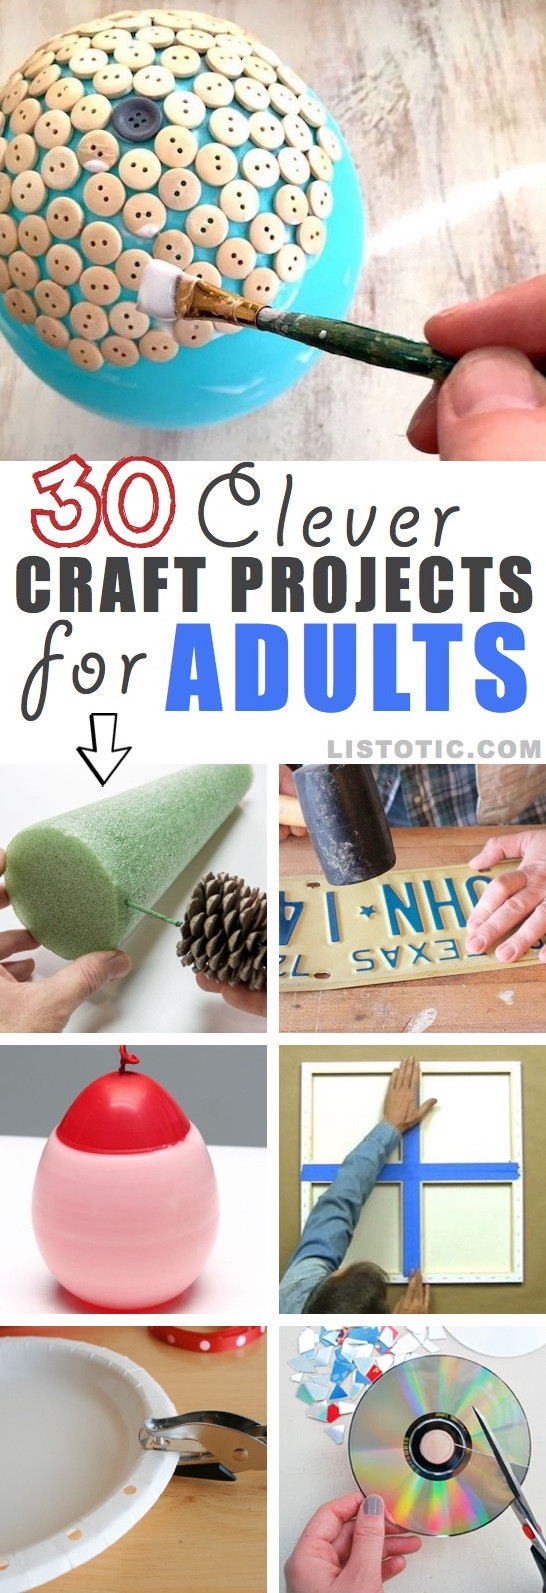 DIY Craft Projects For Adults
 Easy DIY Craft Ideas That Will Spark Your Creativity for